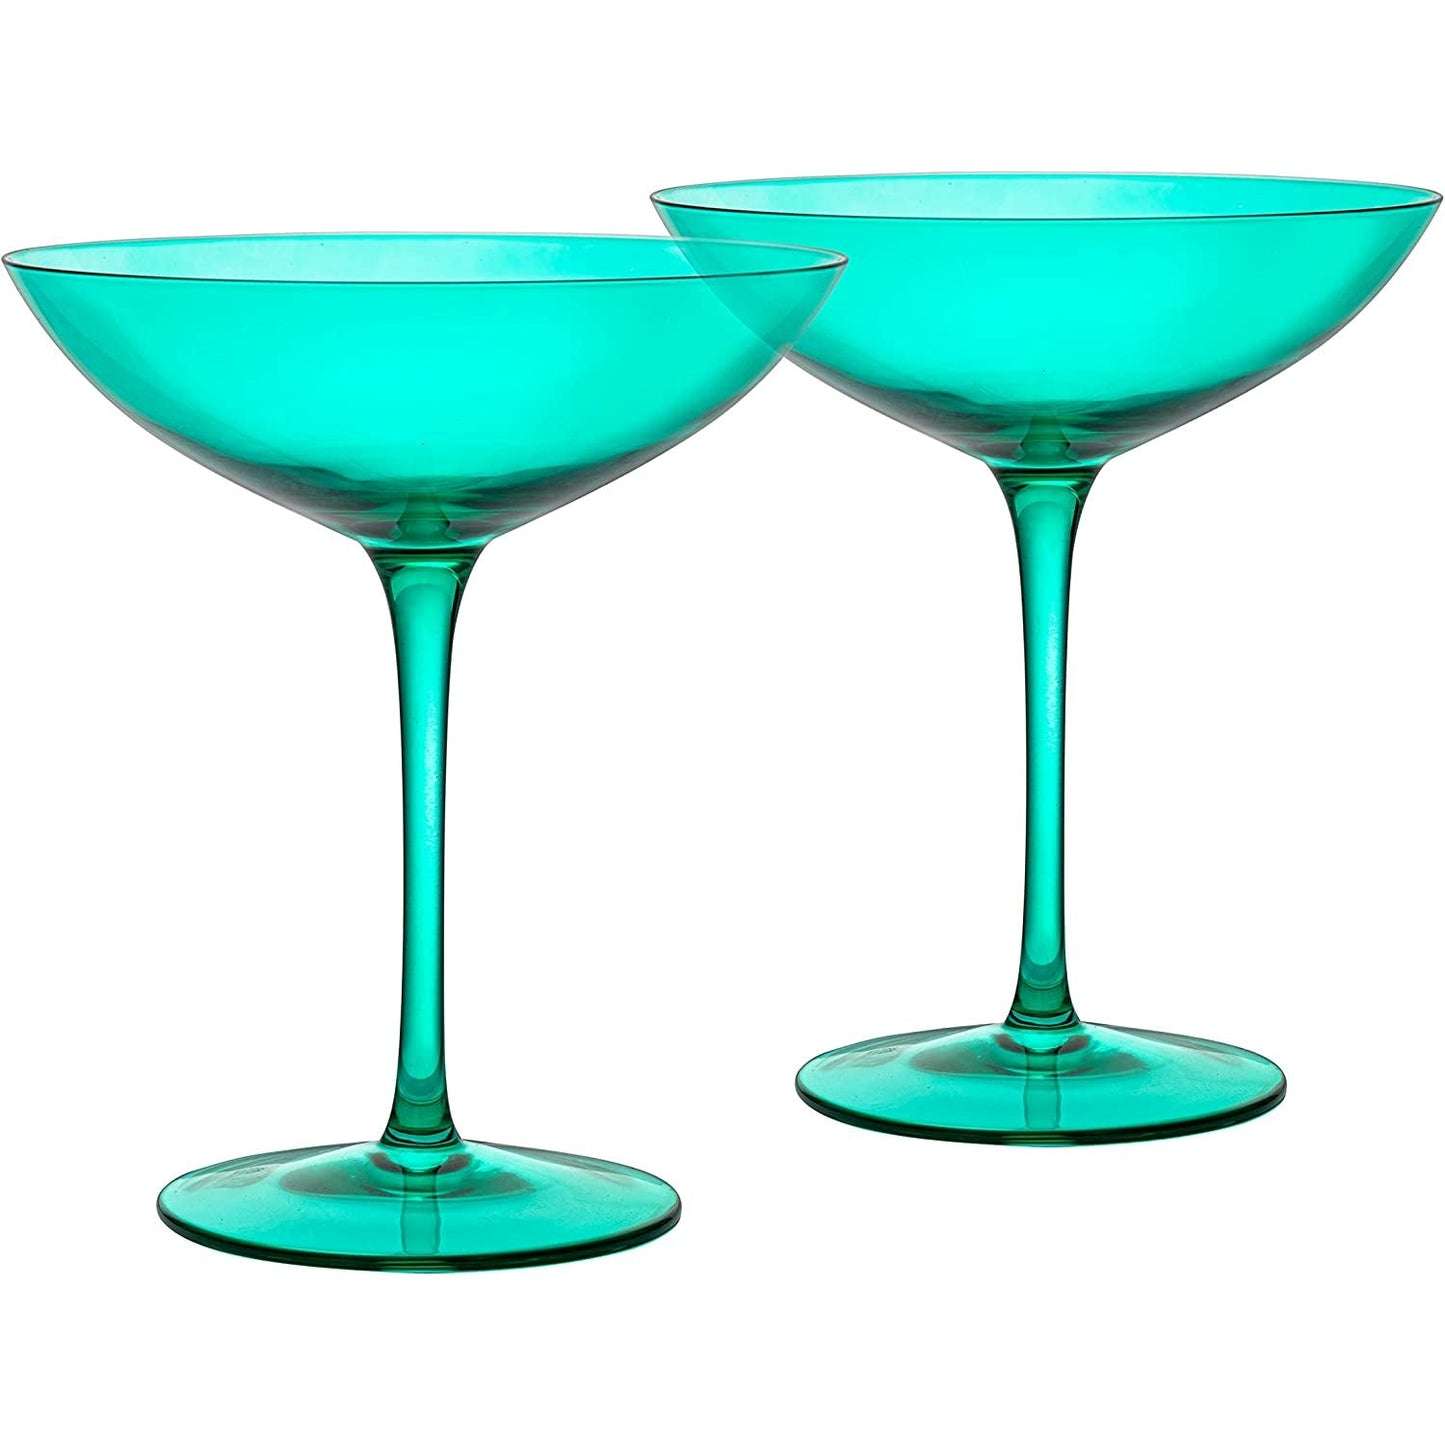 Corse Champagne Coupe Cocktail Glassware, Set of 2, Teal